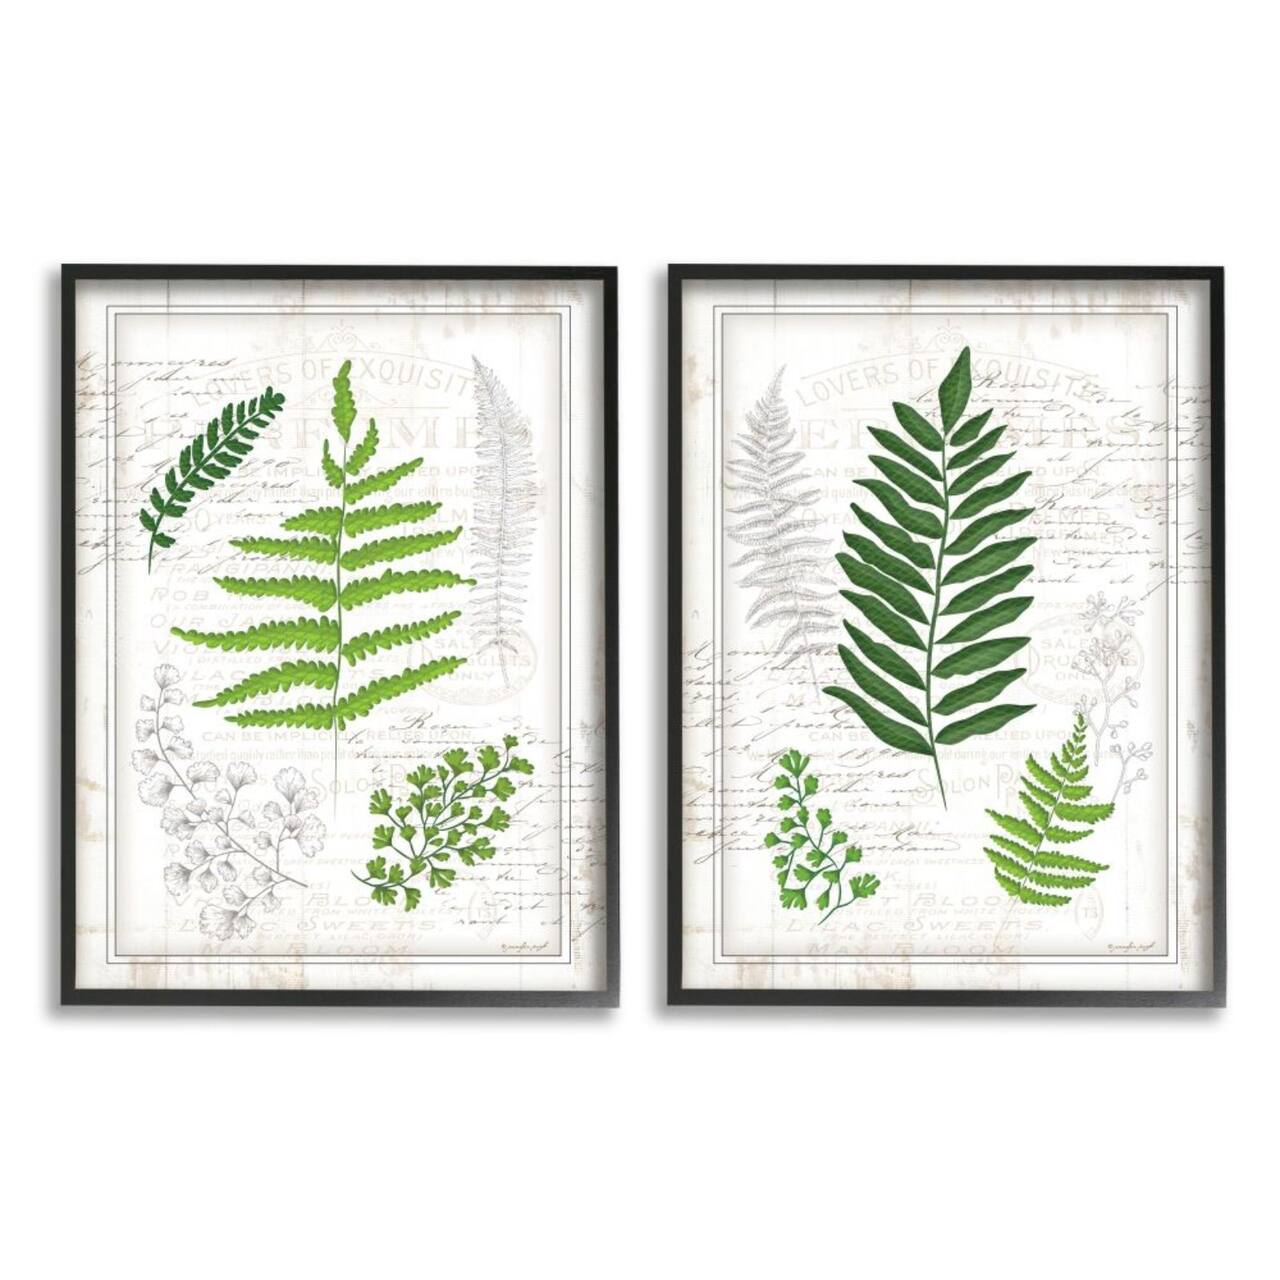 Stupell Industries Antique Fern Study with Script Forest Greenery Framed Wall Art Set